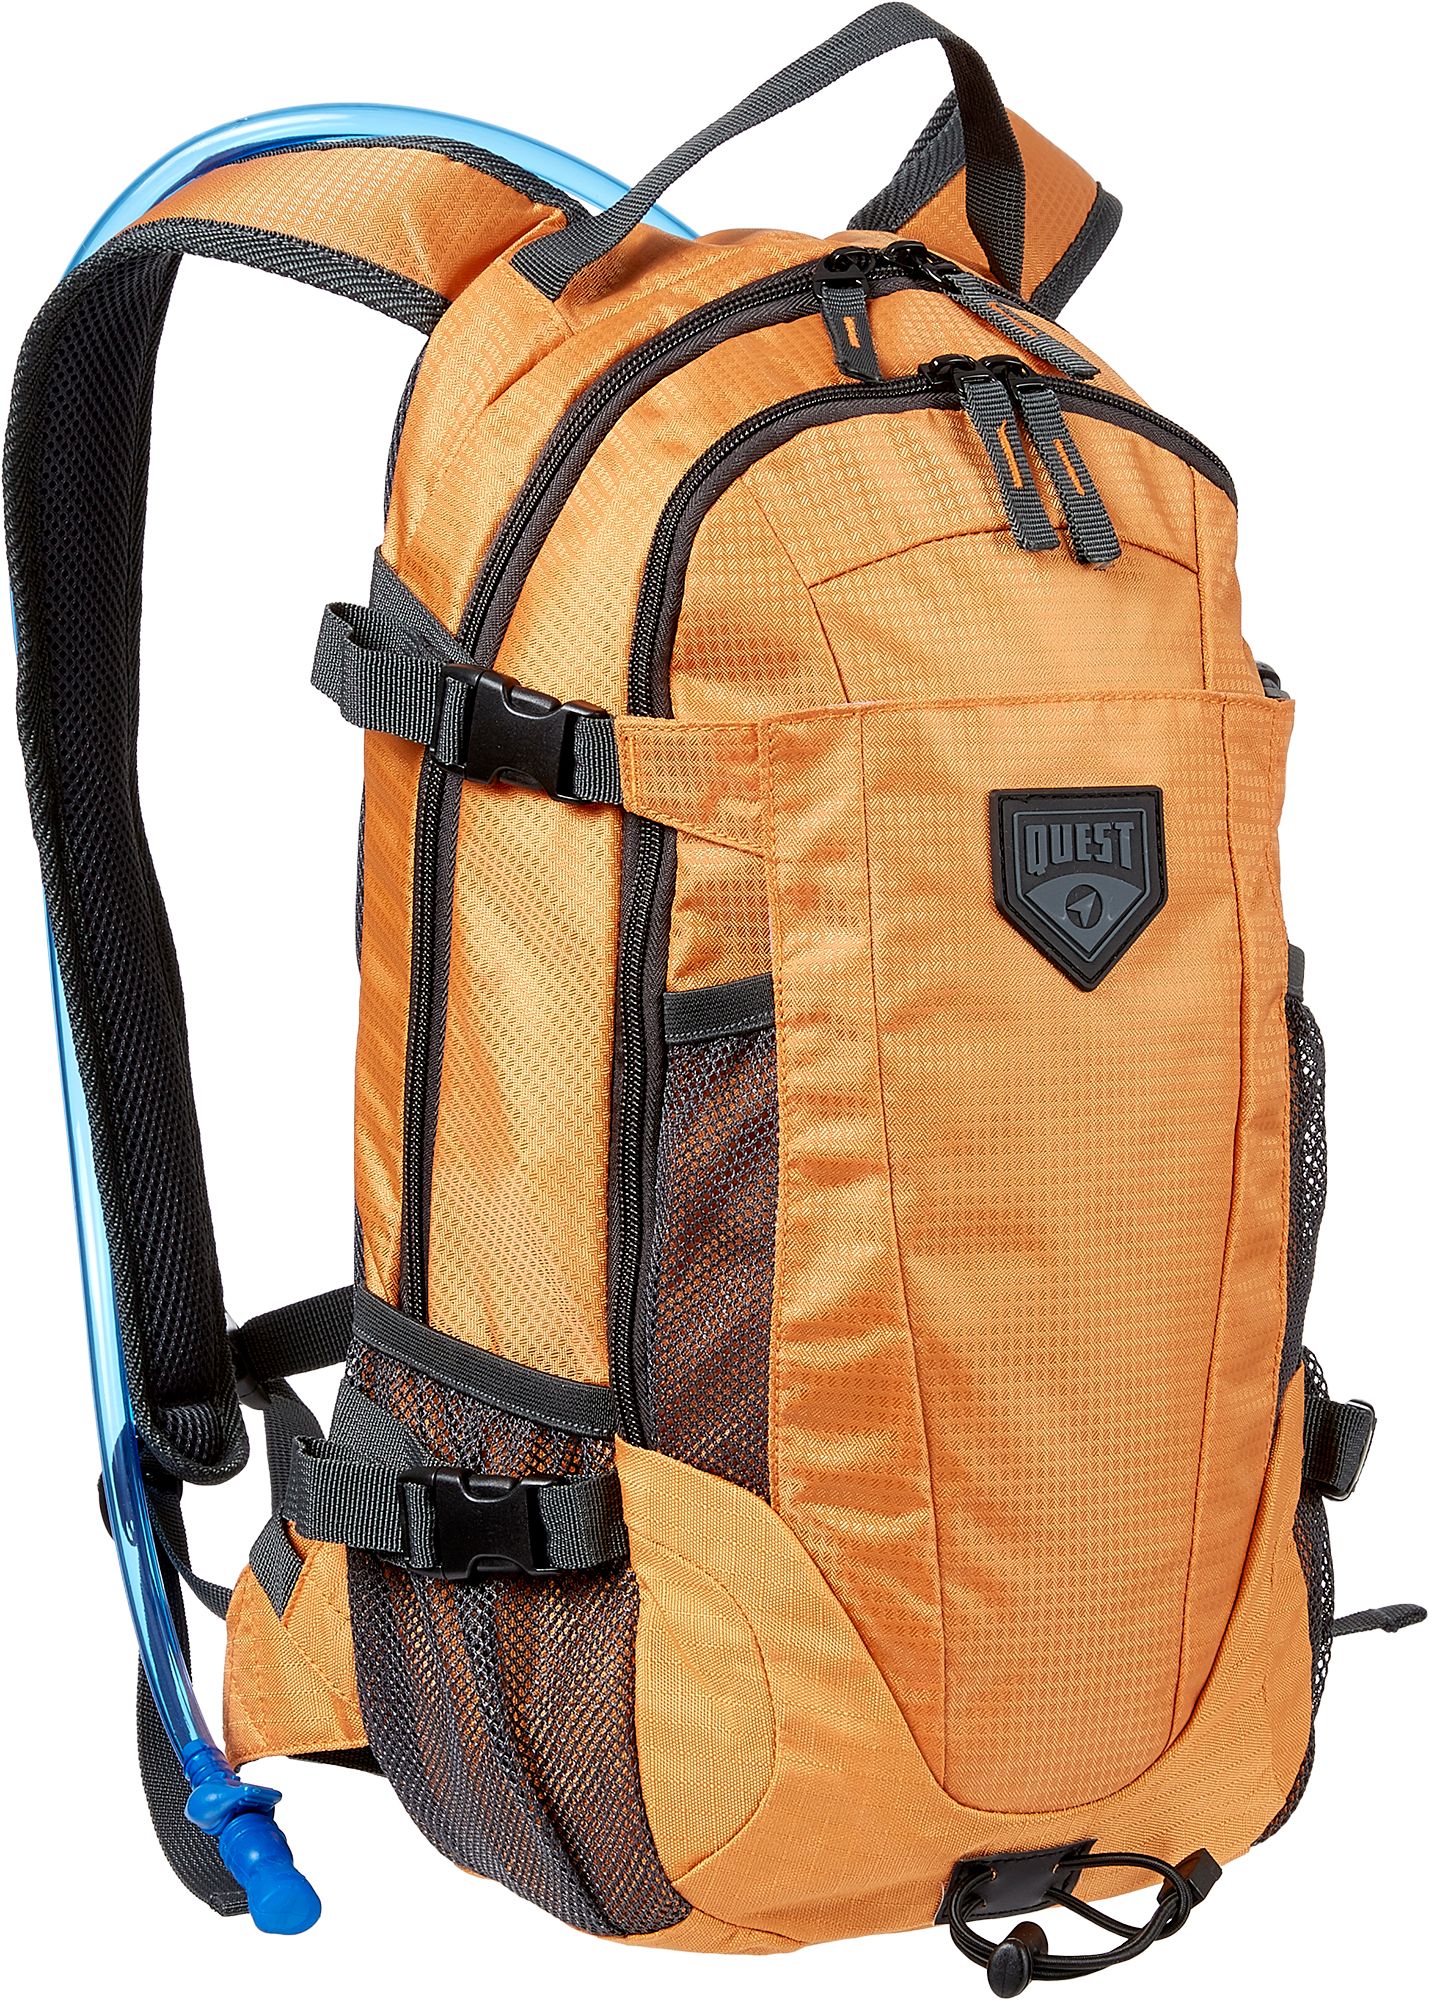 Hydration Packs | Best Price Guarantee at DICK'S